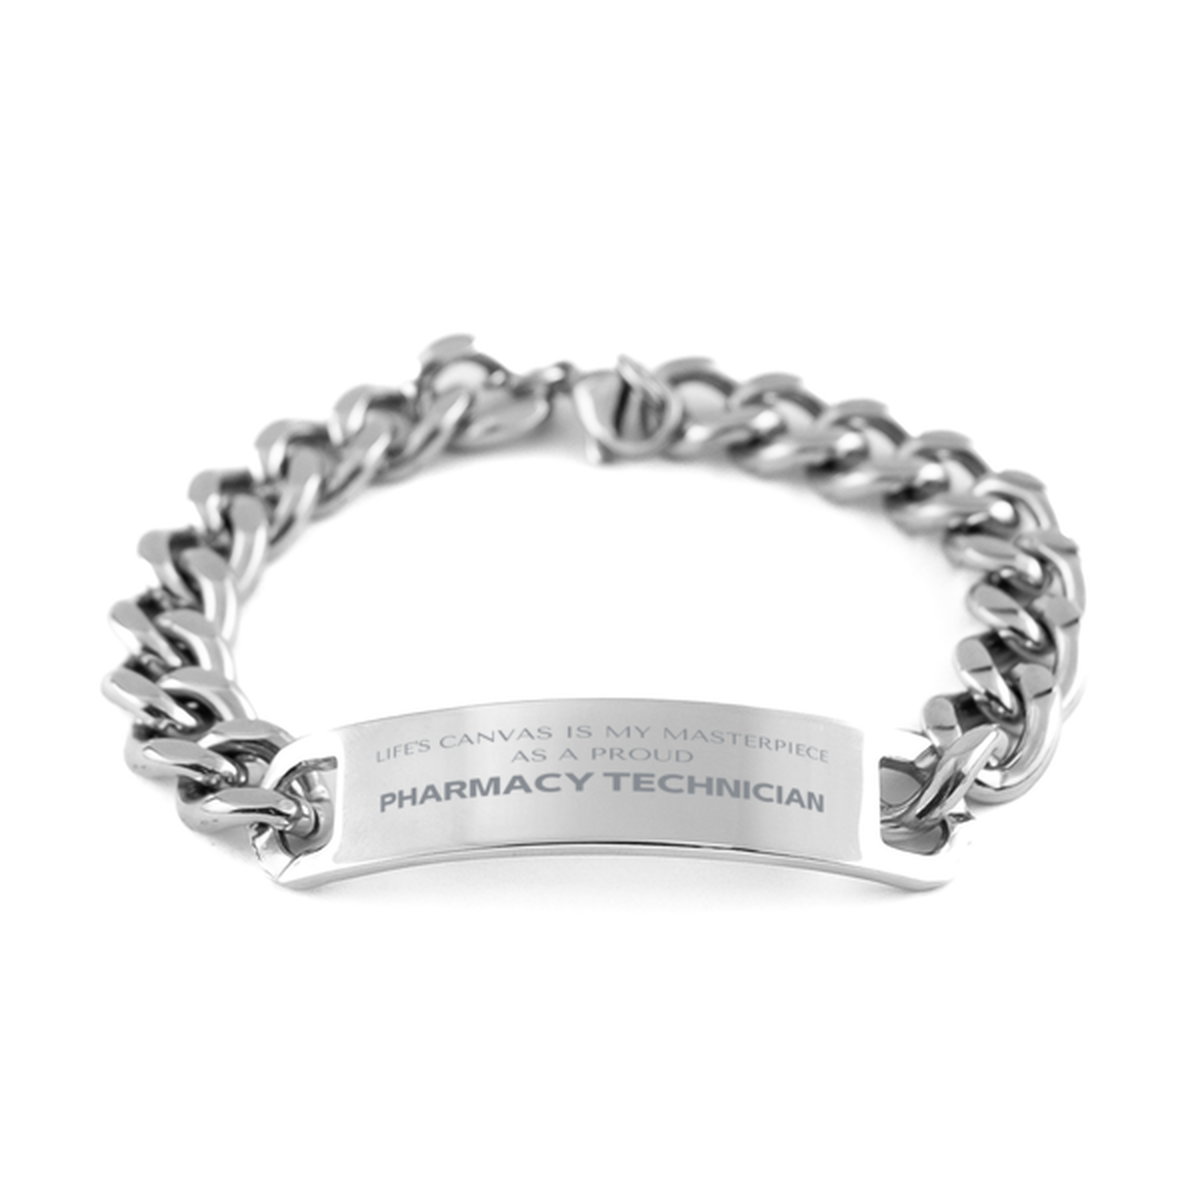 Proud Pharmacy Technician Gifts, Life's canvas is my masterpiece, Epic Birthday Christmas Unique Cuban Chain Stainless Steel Bracelet For Pharmacy Technician, Coworkers, Men, Women, Friends